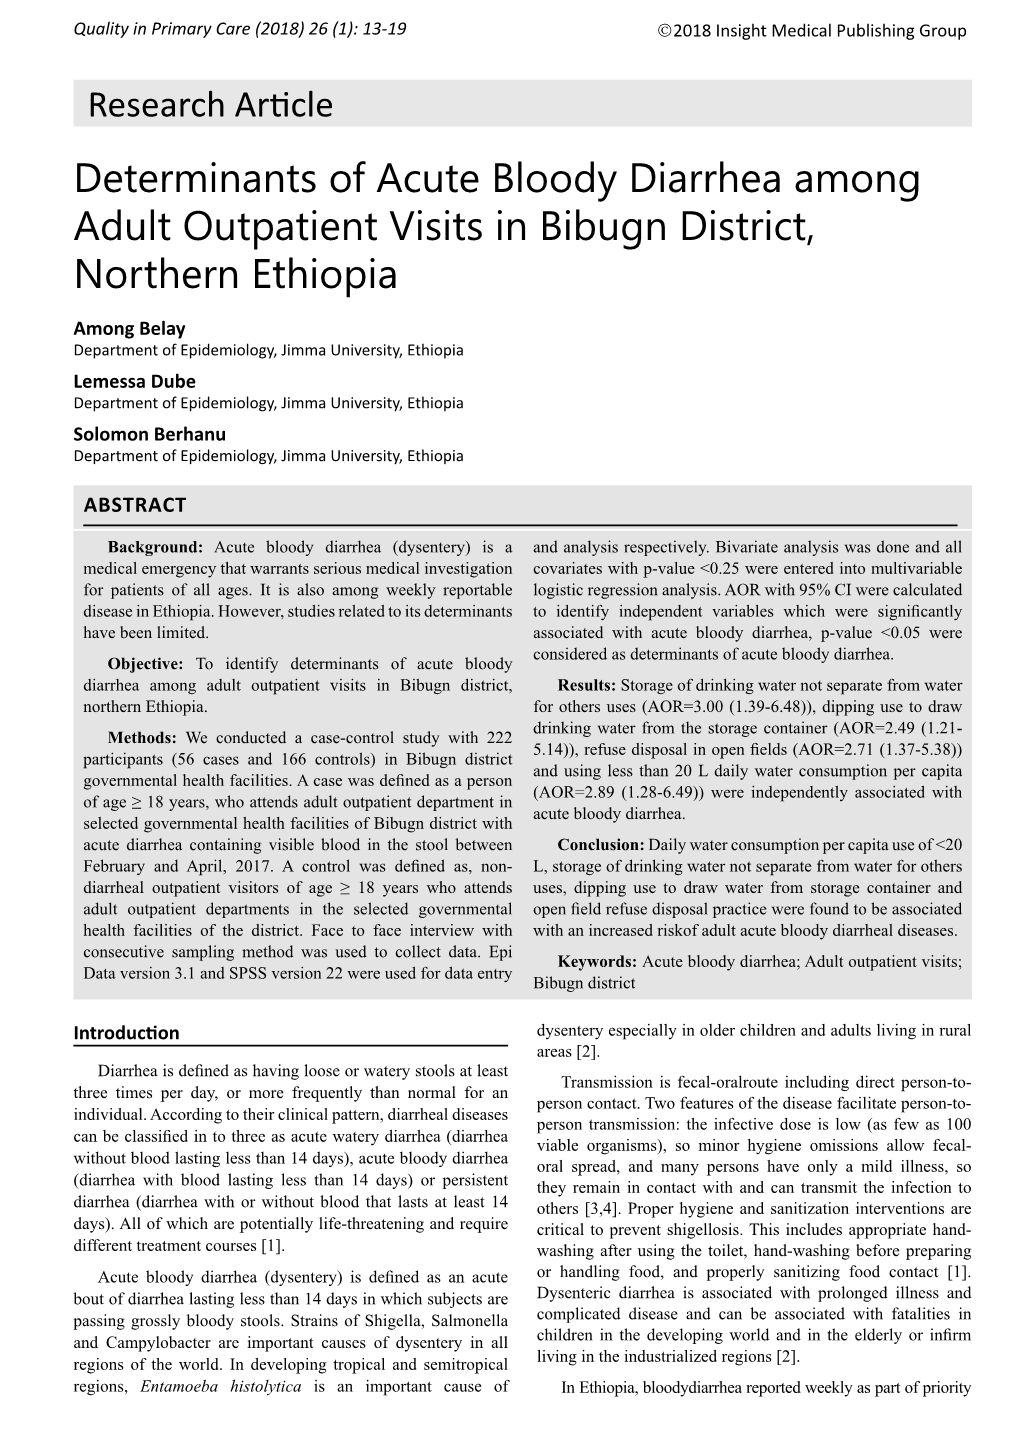 Determinants of Acute Bloody Diarrhea Among Adult Outpatient Visits in Bibugn District, Northern Ethiopia